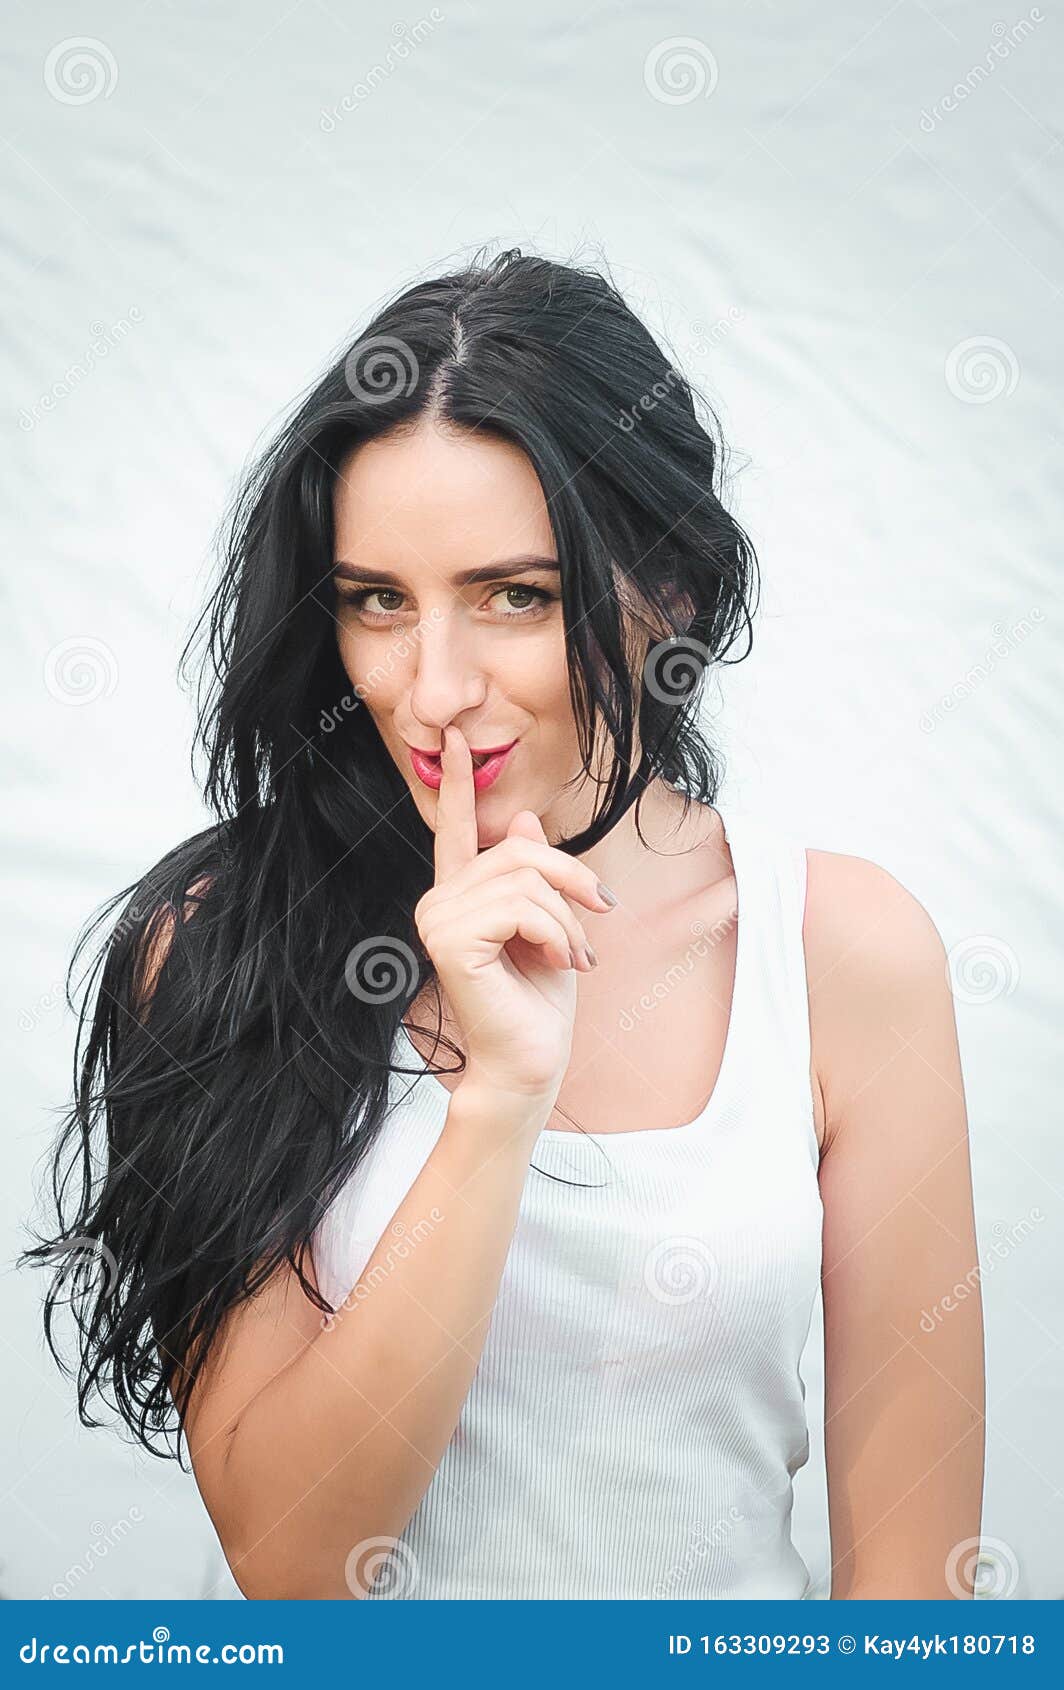 Girl Presses Index Finger To Her Lips Portrait Of A Beautiful Young 